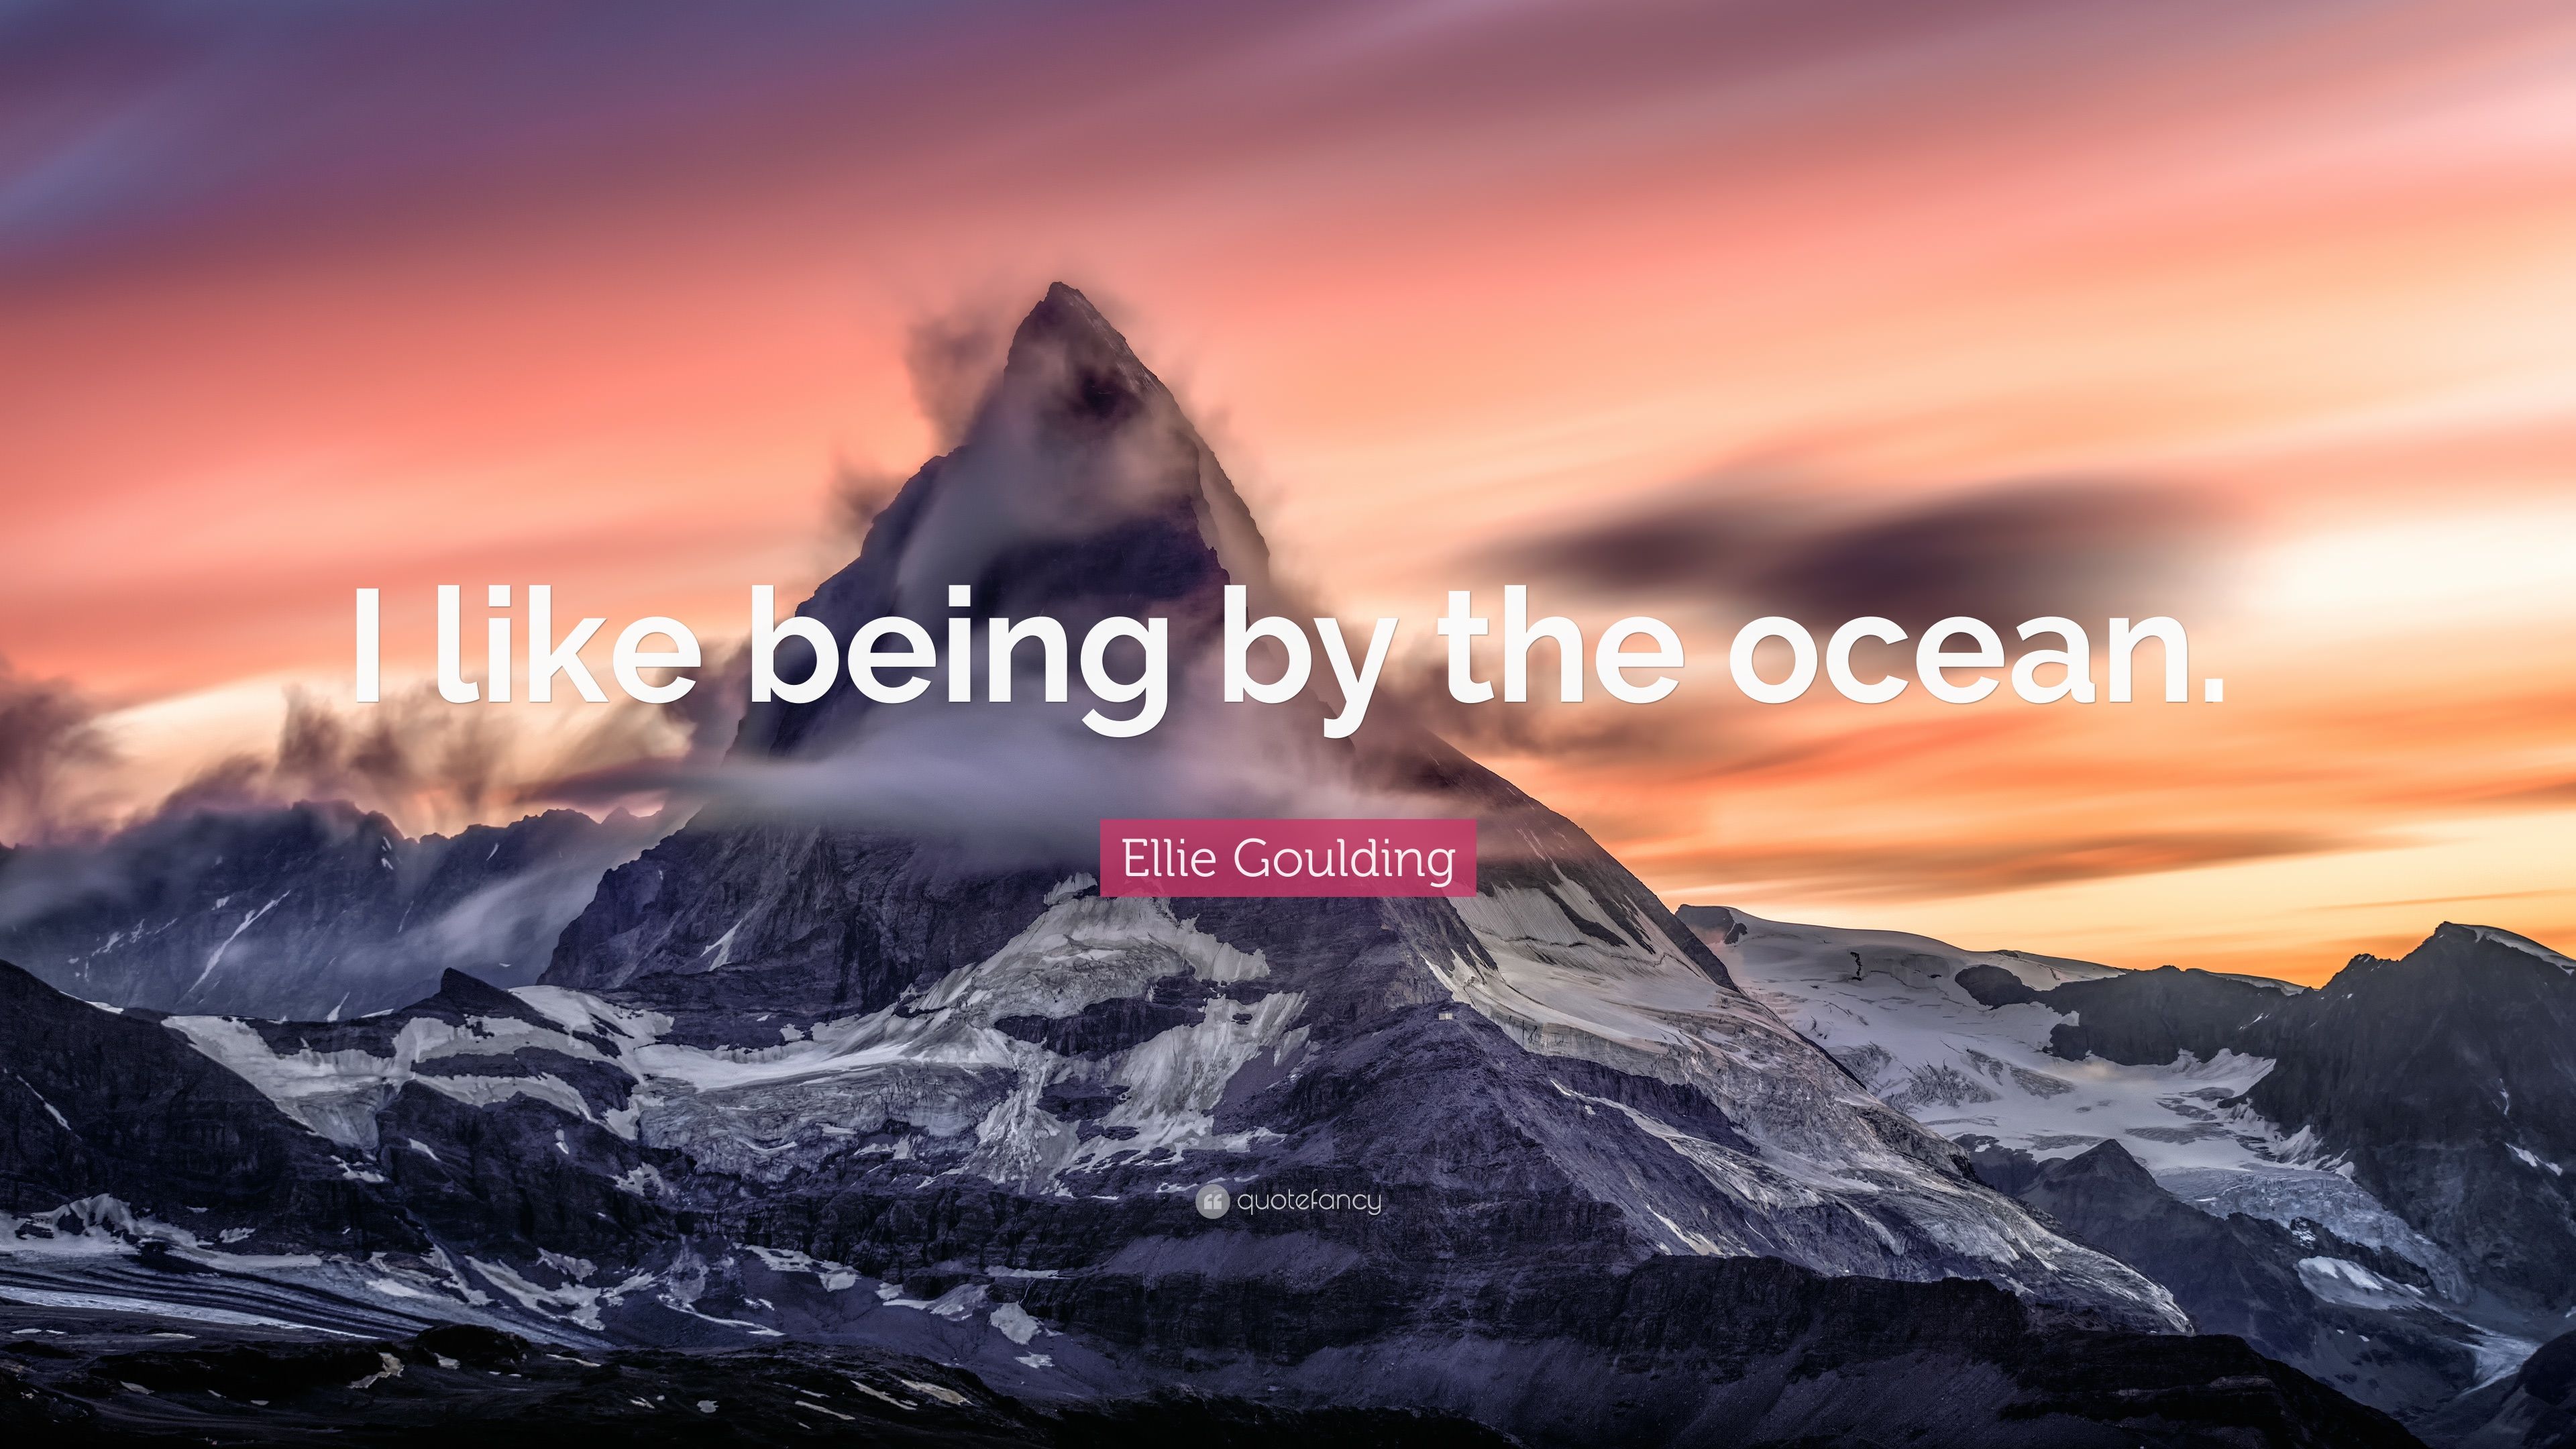 Ellie Goulding Quote: “I like being by the ocean.” (7 wallpaper)